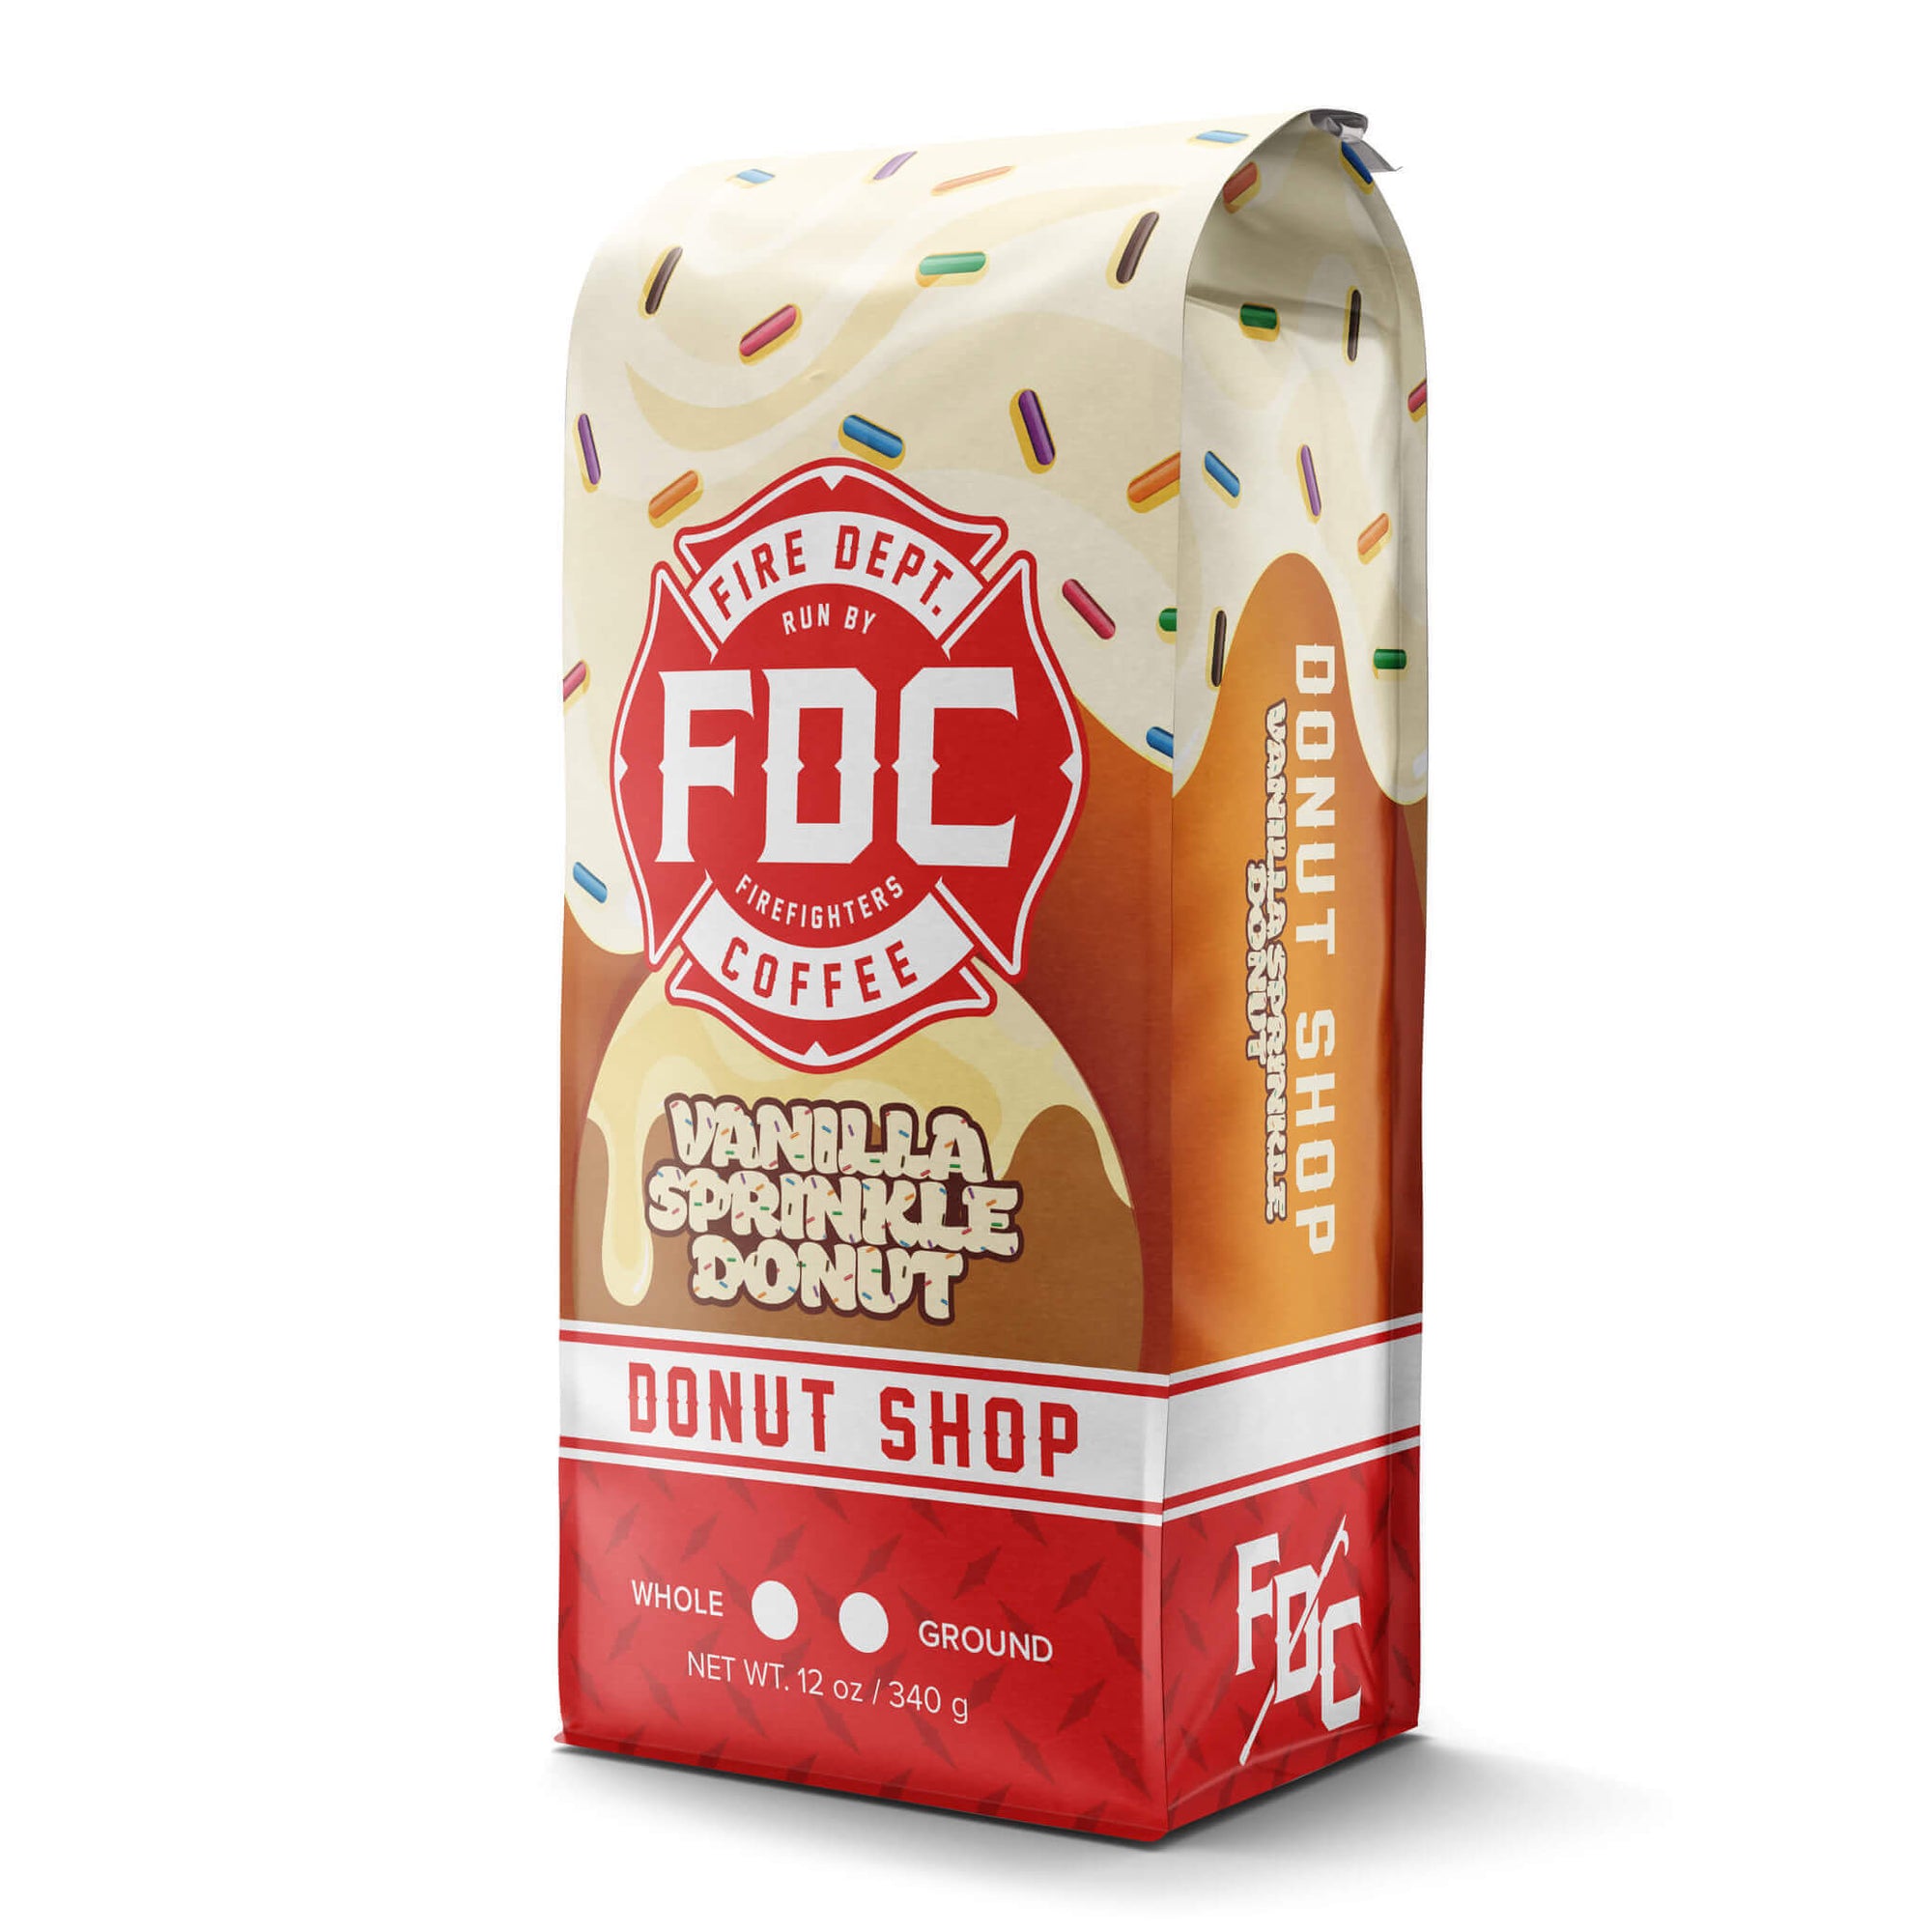 Fire Dept. Coffee's 12 ounce Vanilla Sprinkle Donut Shop Coffee in a rectangular package